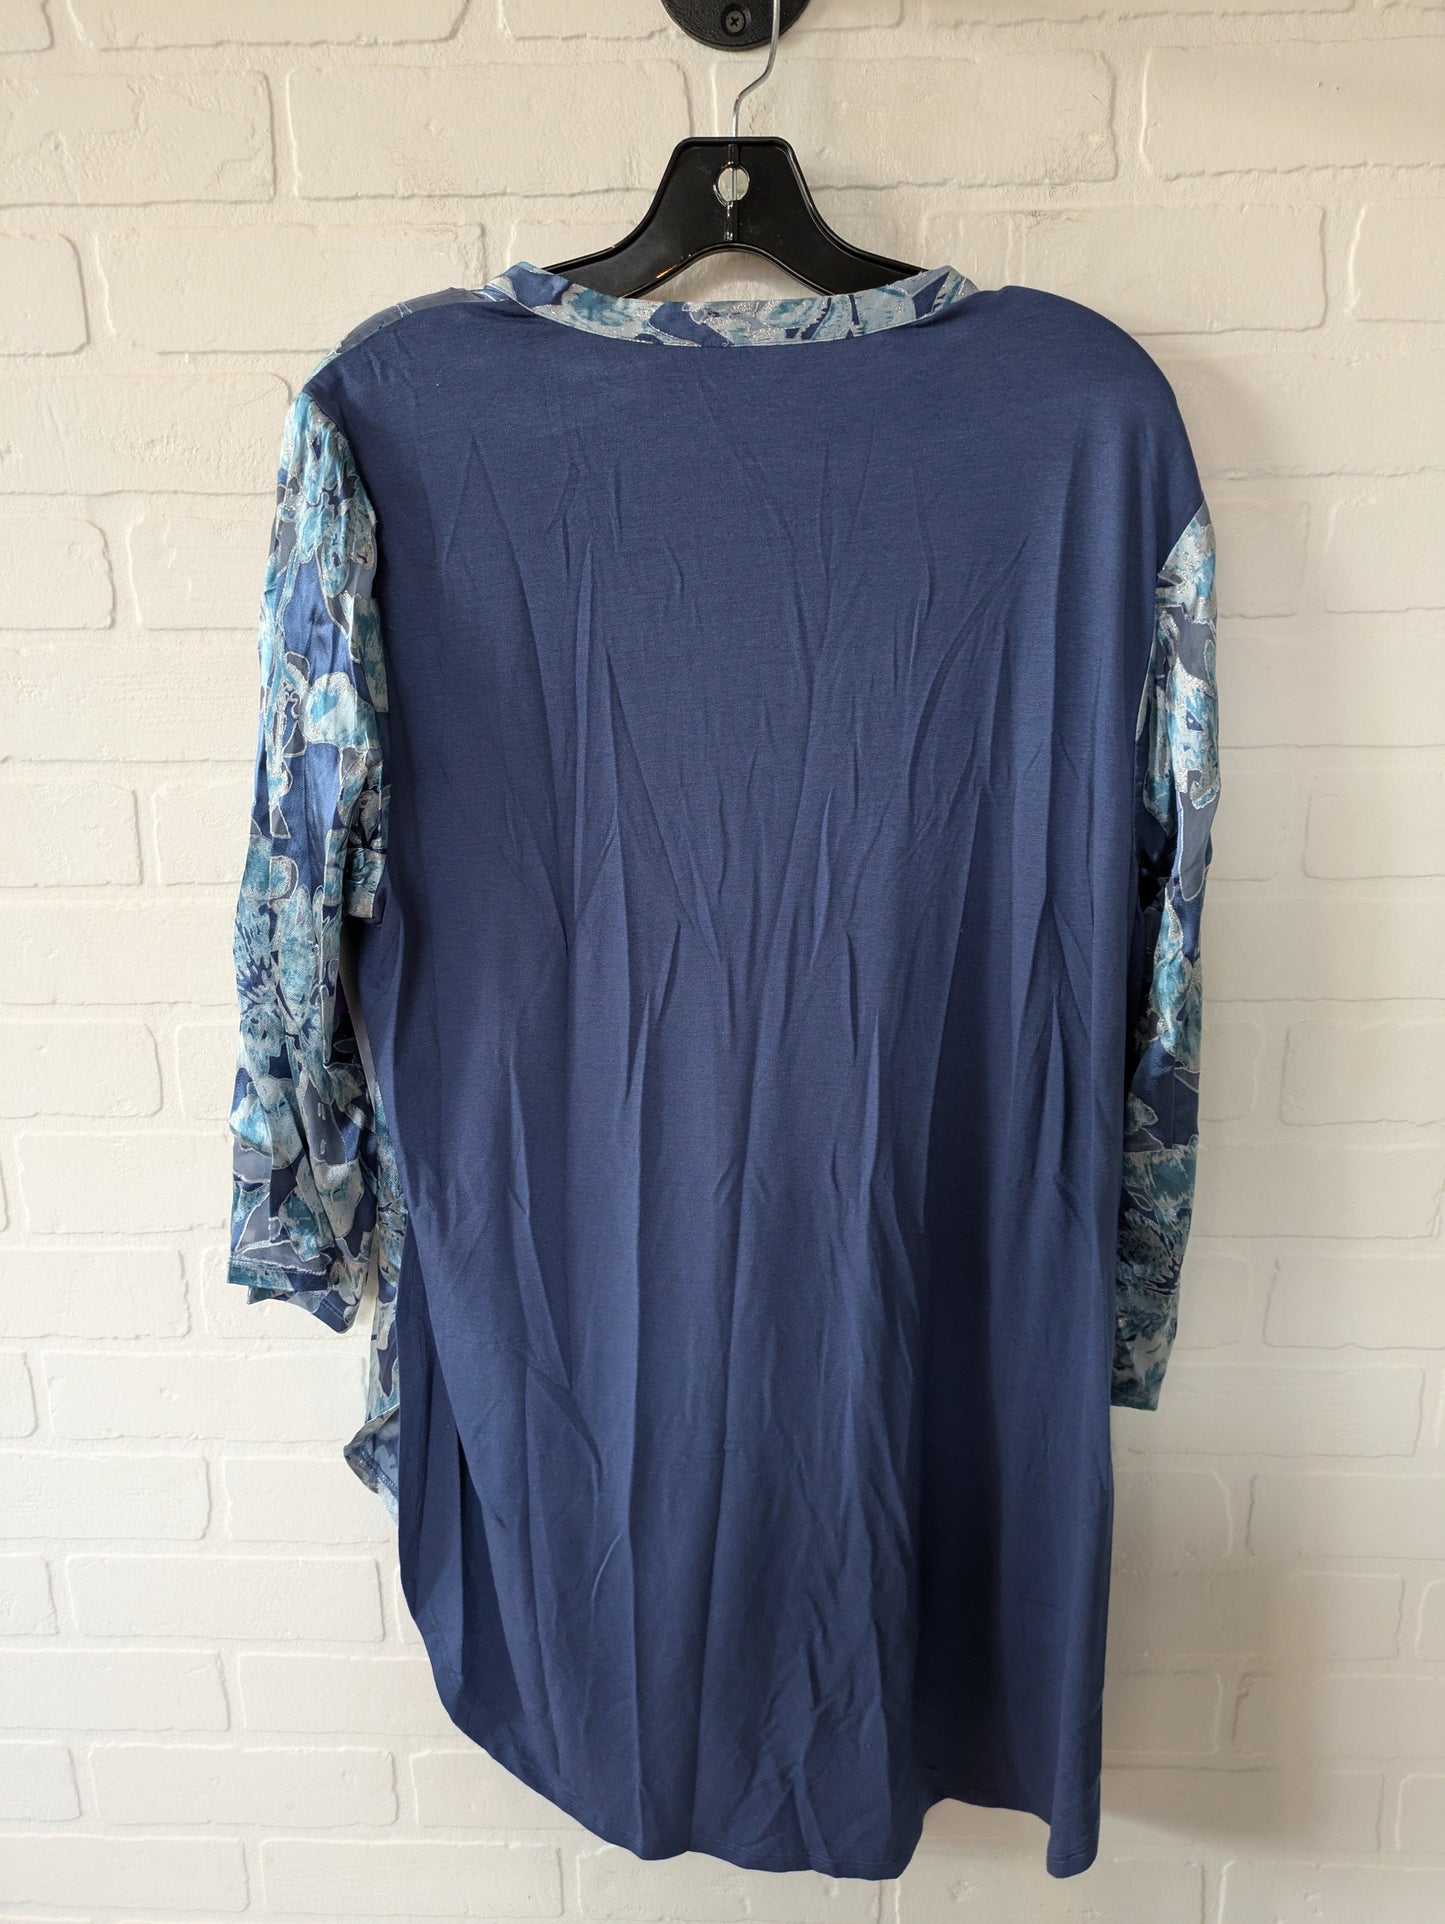 Blue & Silver Blouse Long Sleeve Chicos, Size L